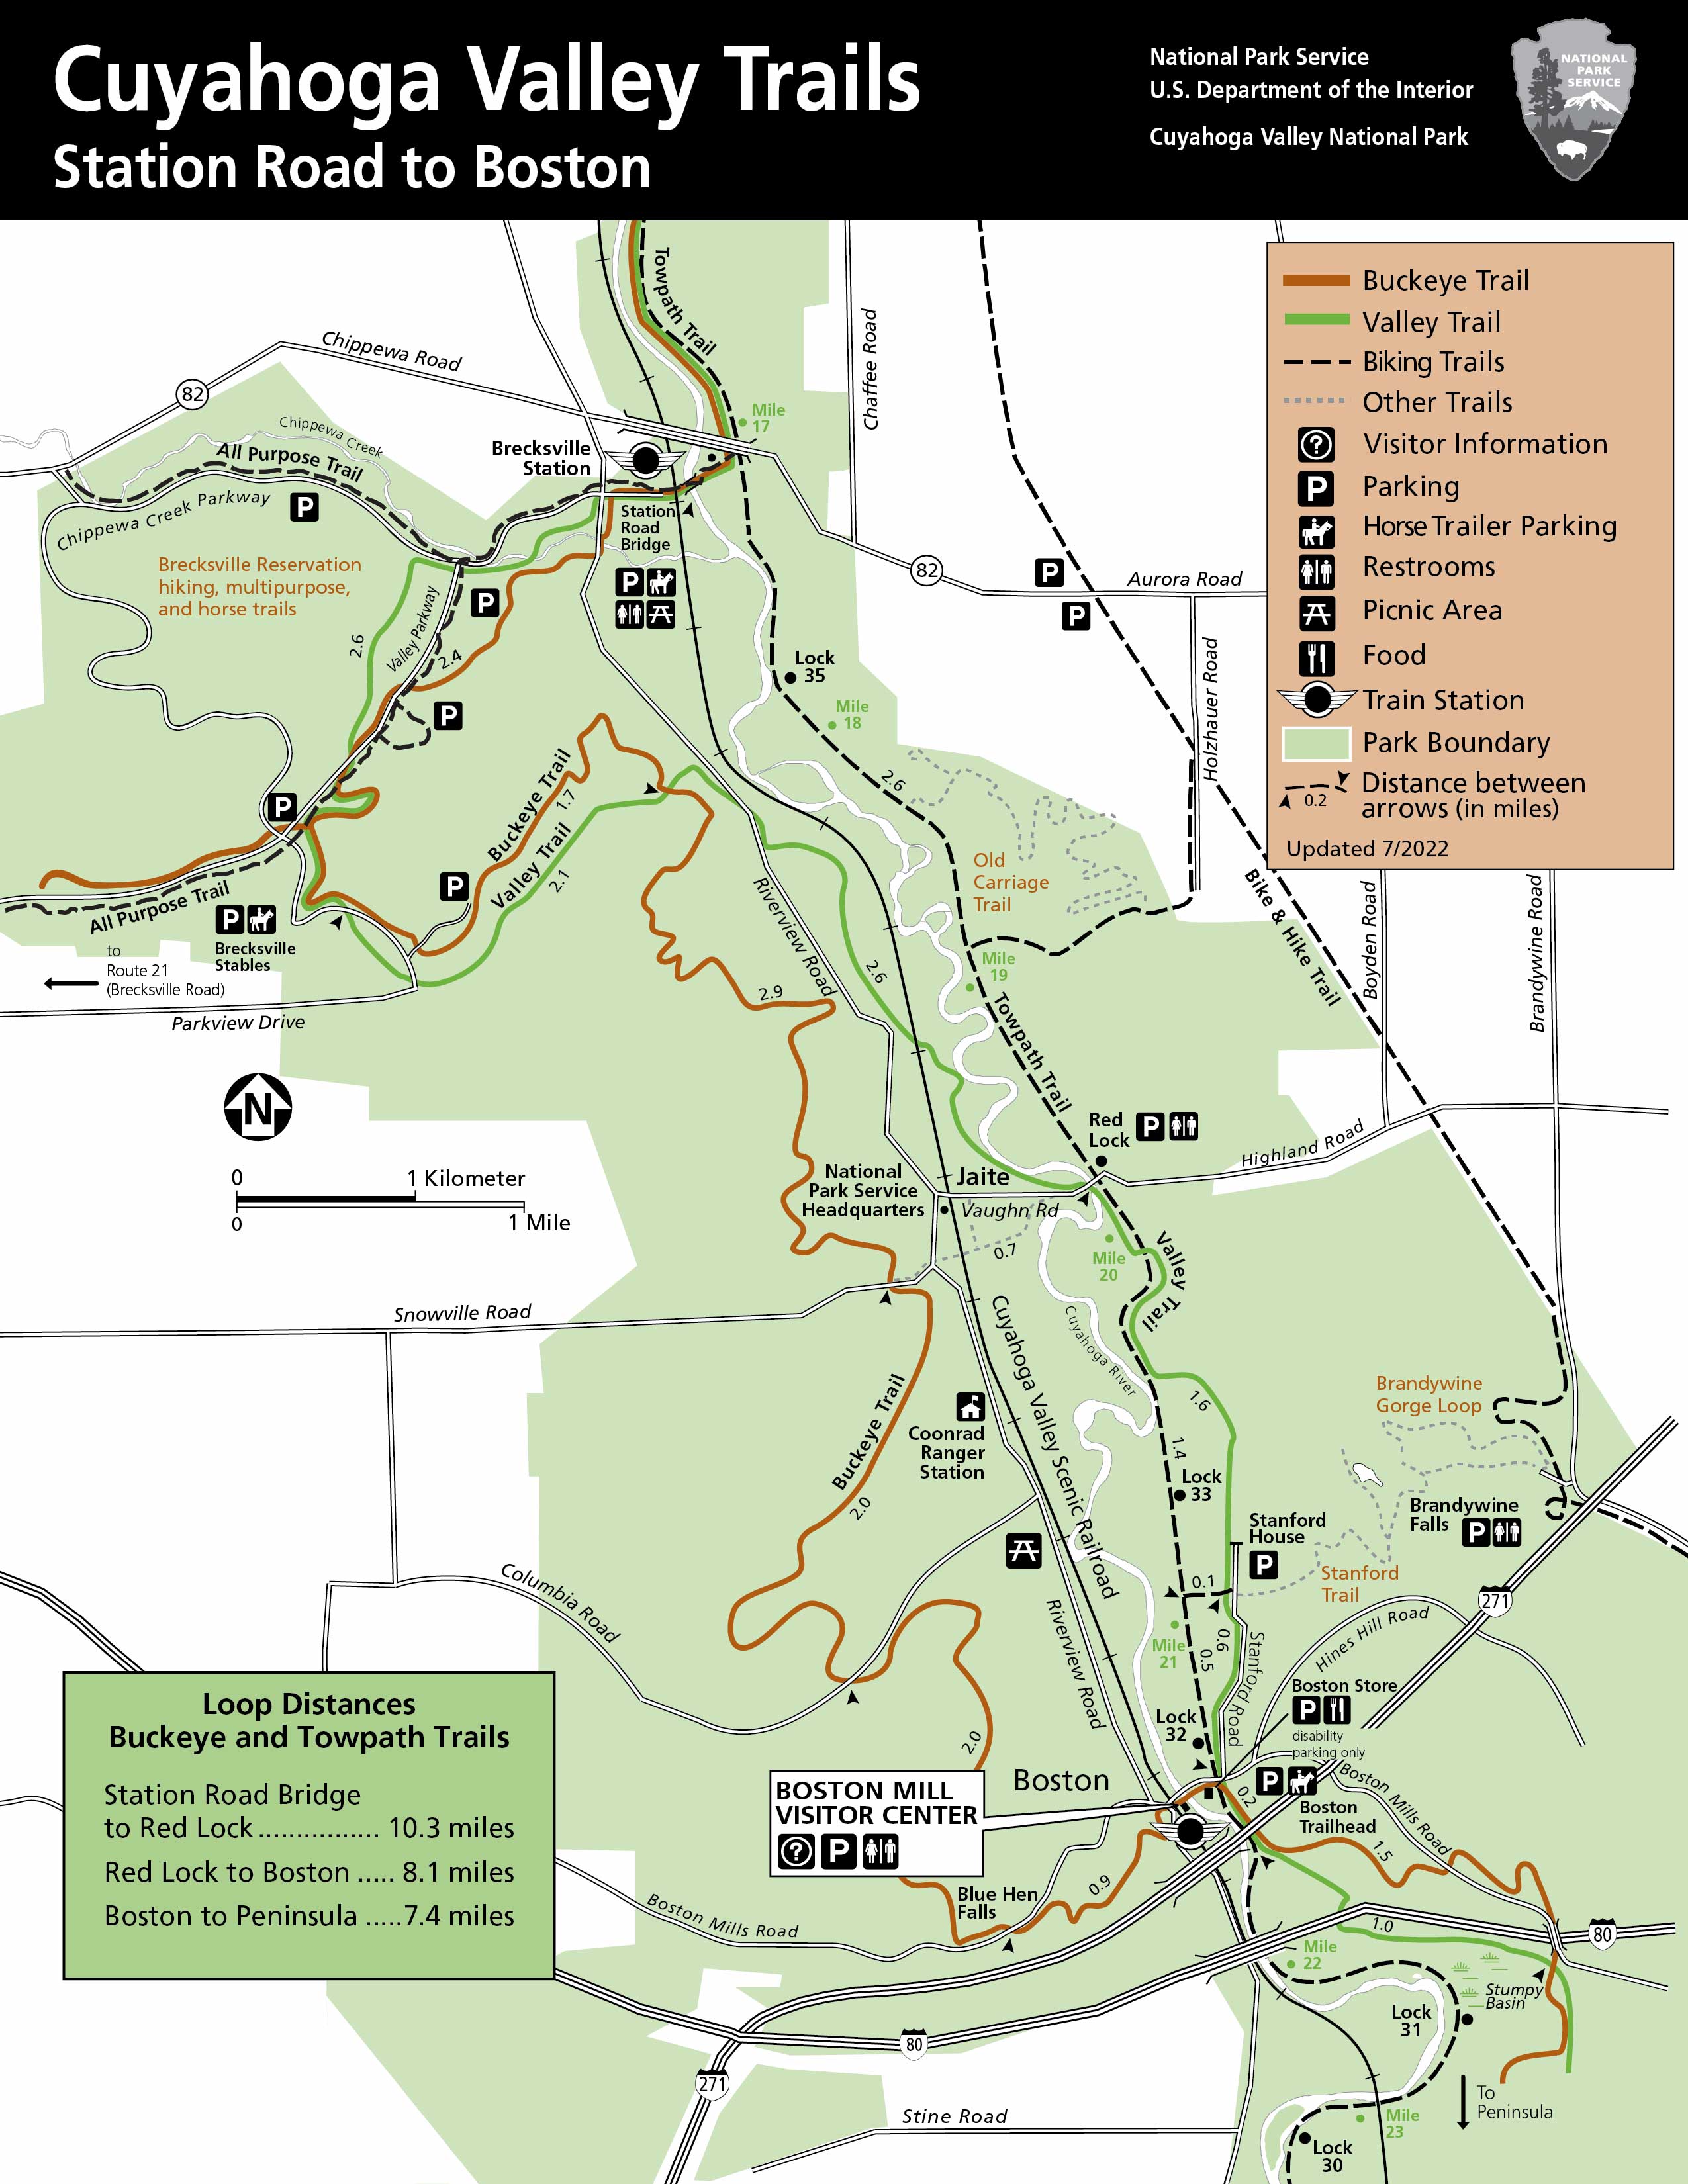 Wetmore Area Trails Allow Horses And Hikers. Wetmore, 4.5 Miles, 250 Ft Elevation Change. Butler’s, 0.6 Miles Each Way, 150 Ft Elevation Change. Langes Run, 3.5 Miles, 190 Ft Elevation Change. Tabletop, 0.75 Miles Each Way, 100 Ft Elevation Change. - Wetmore Area trails allow horses and hikers. Wetmore, 4.5 miles, 250 ft elevation change. Butler’s, 0.6 miles each way, 150 ft elevation change. Langes Run, 3.5 miles, 190 ft elevation change. Tabletop, 0.75 miles each way, 100 ft elevation change.